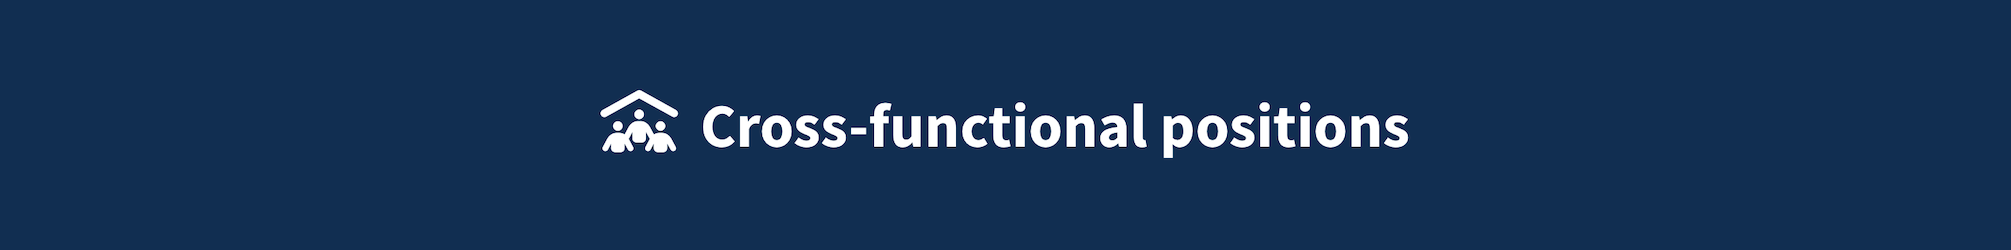 Cross-functional positions